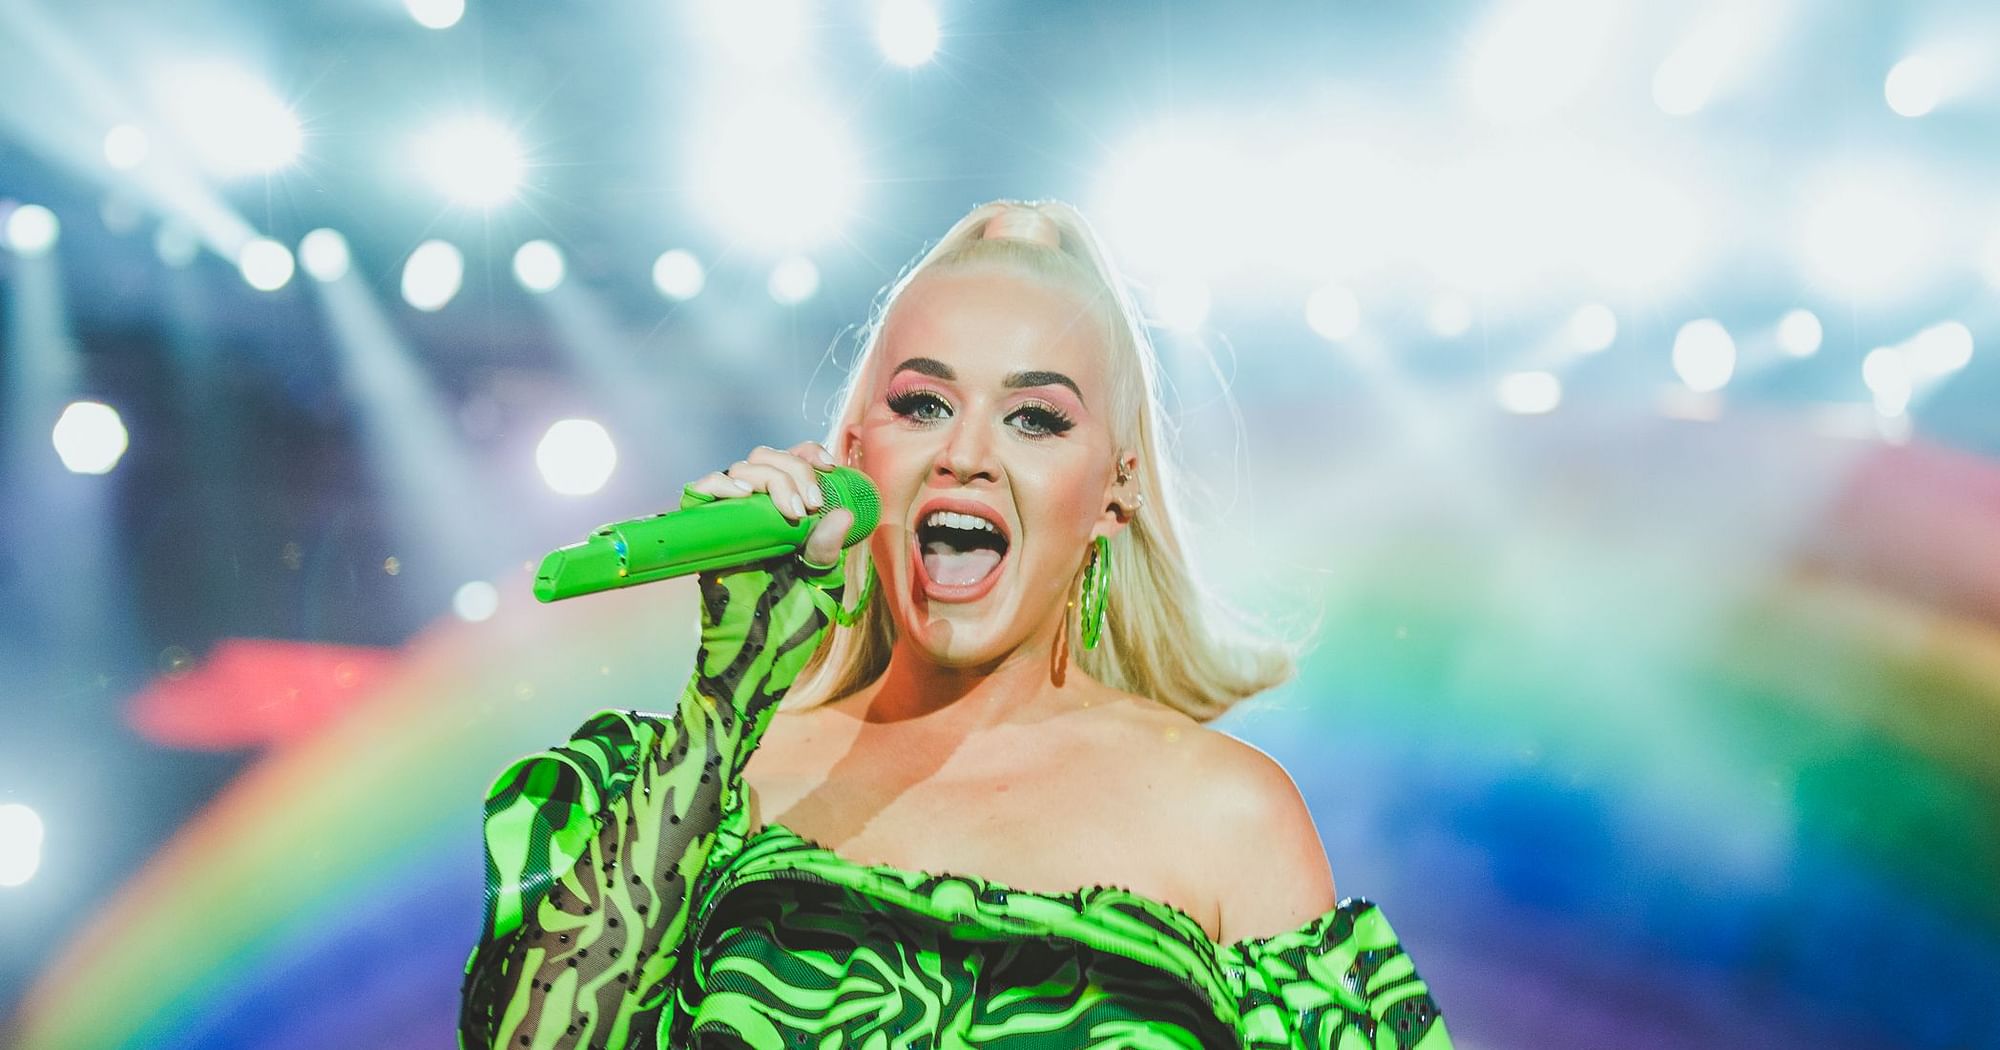 One Plus Music Festival 2019 Katy Perry And Dua Lipa Take The Audiences By A Storm And Show